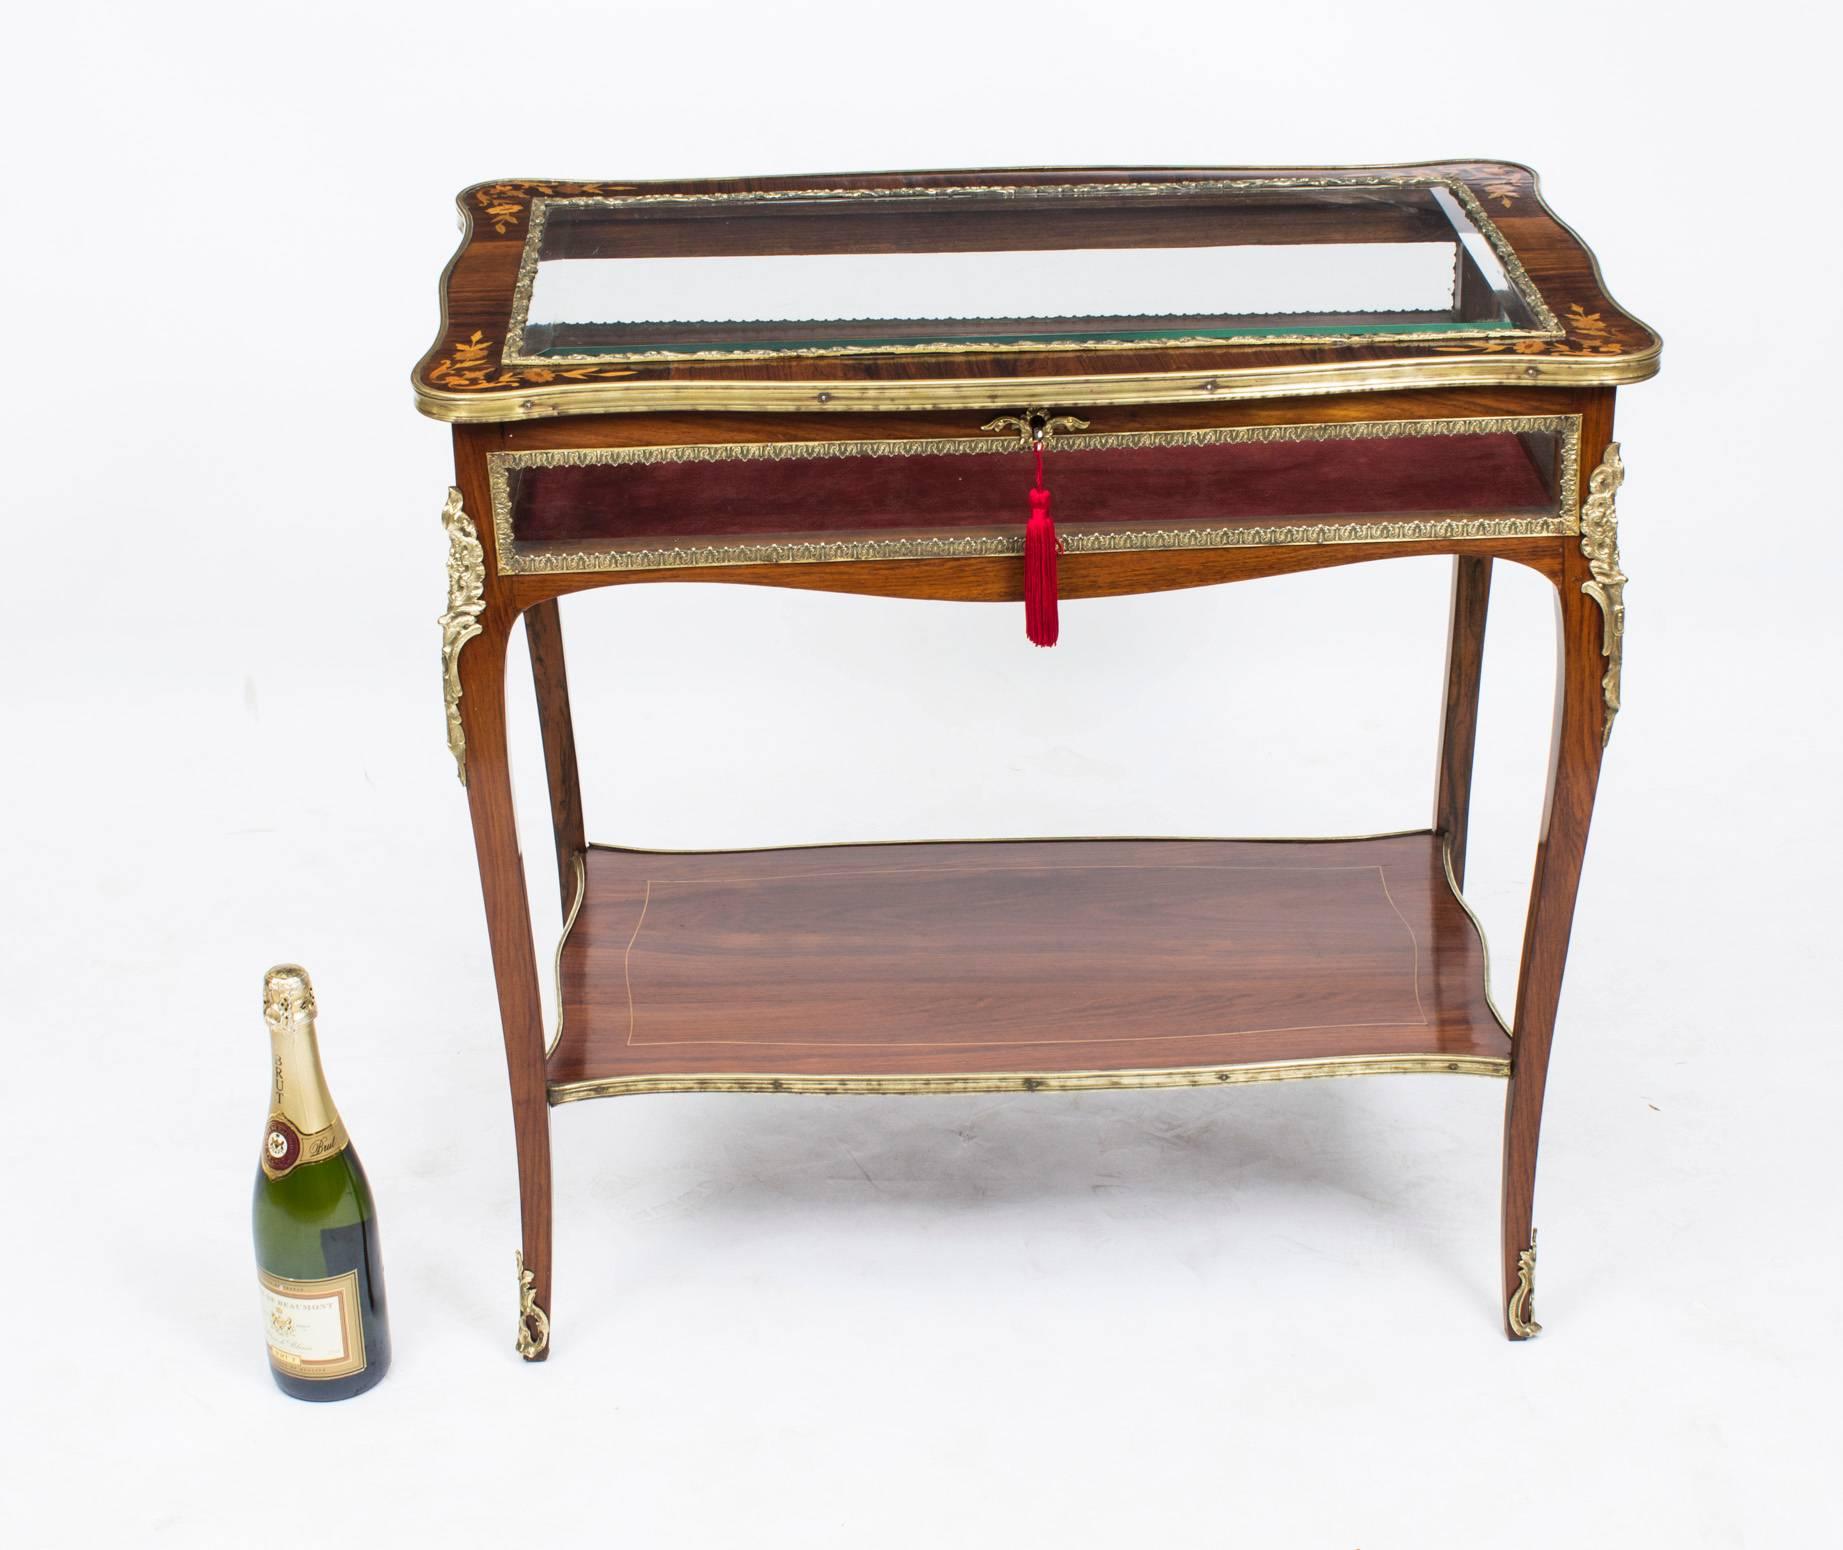 Ormolu Antique Rosewood and Marquetry Bijouterie Display Table